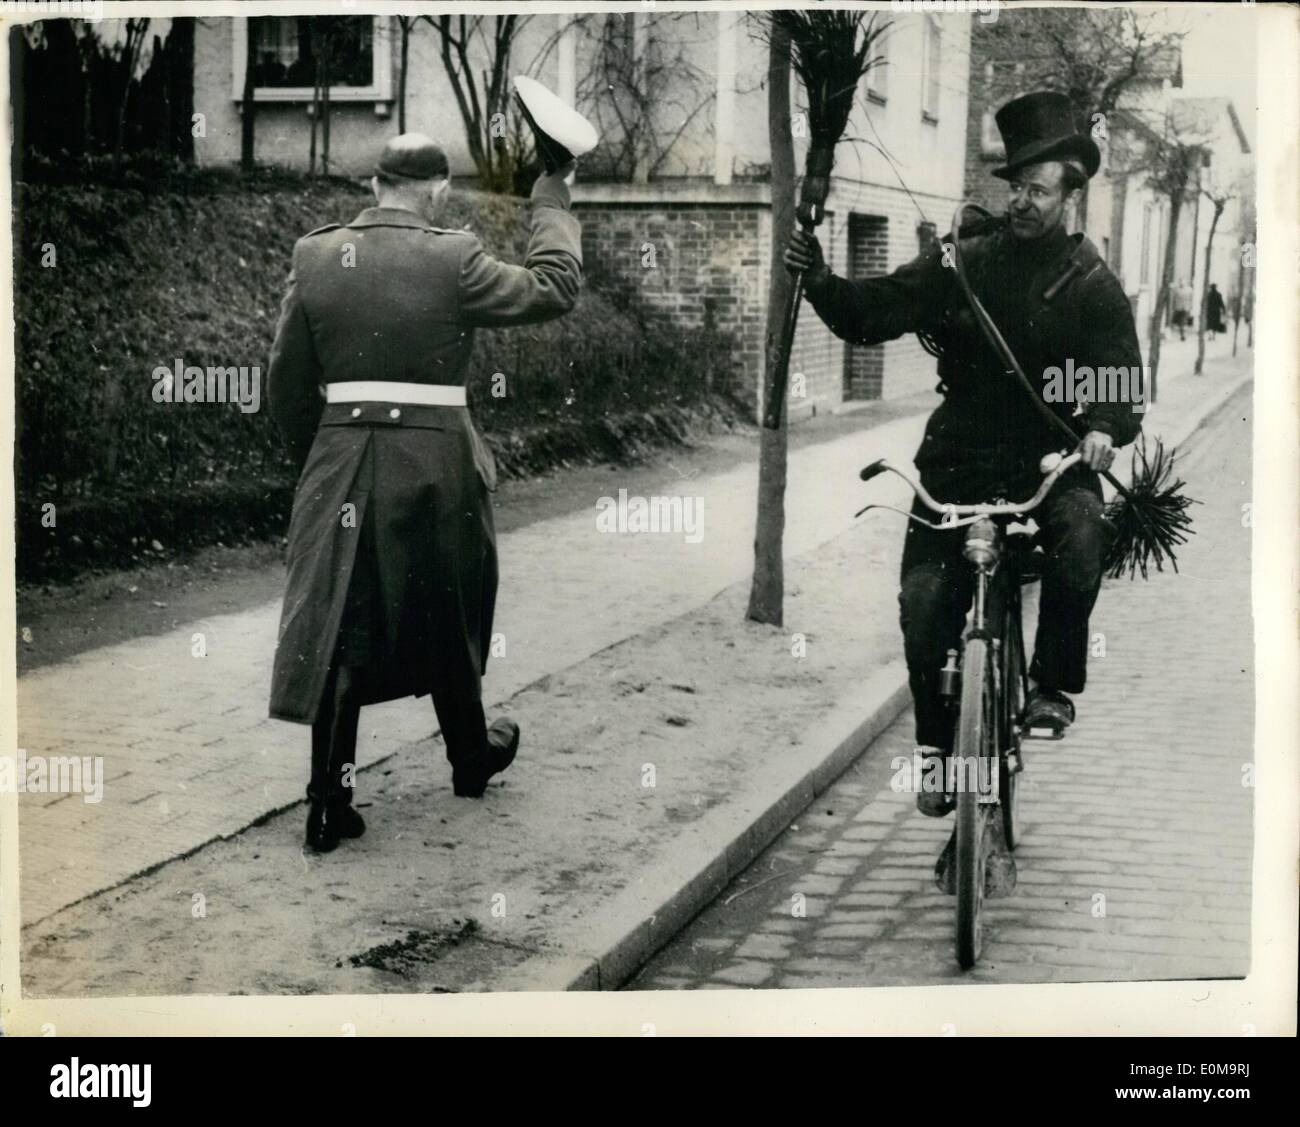 Mar. 03, 1954 - The Chimney Sweep Salutes With His Brush His Hat Is Otherwise Occupied: Police Supt. Ernst Werft, of Schleswig Holstein, Germany instructed his men to follow the Old Old custom of saluting good-luck sweep usually saluted in return but not with the traditional hat-raising..He held an inquiry - and discovered the reason to that the sweeps used their top hats as containers for eggs -- bacon - beer etc..give by grateful customers..So the sweeps continue to salute - with their brushes - and not hats Stock Photo